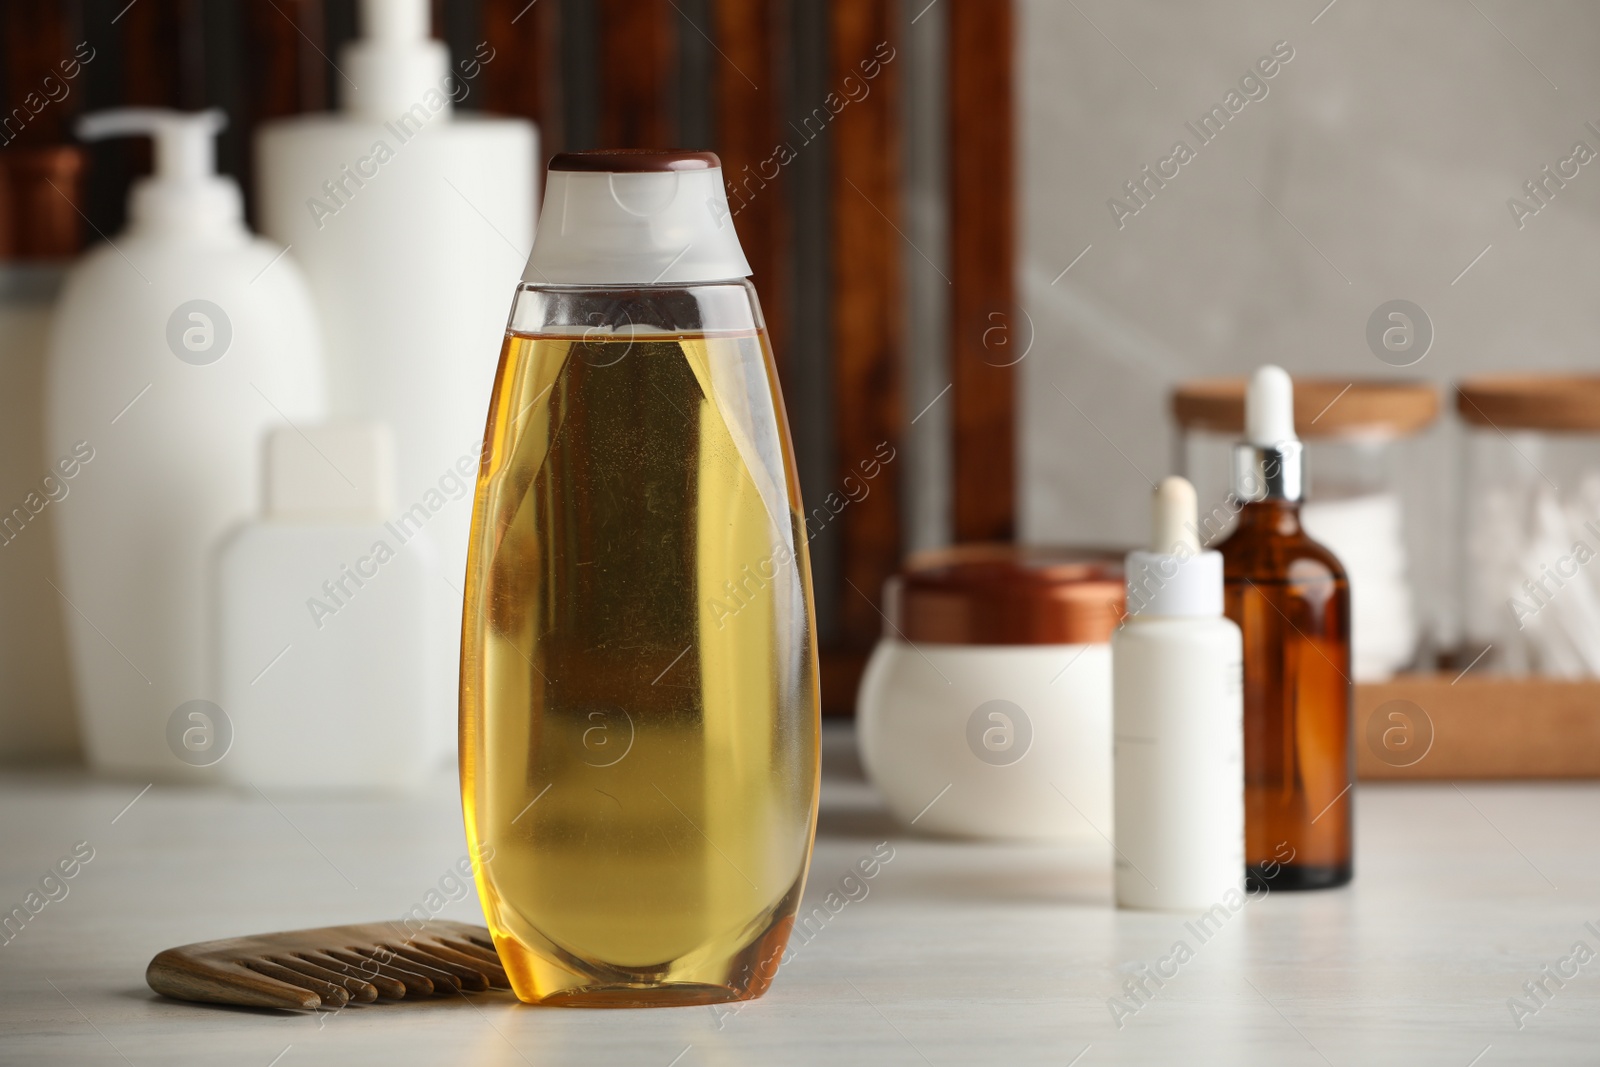 Photo of Bottle of shampoo, wooden comb and toiletries on white table indoors, space for text